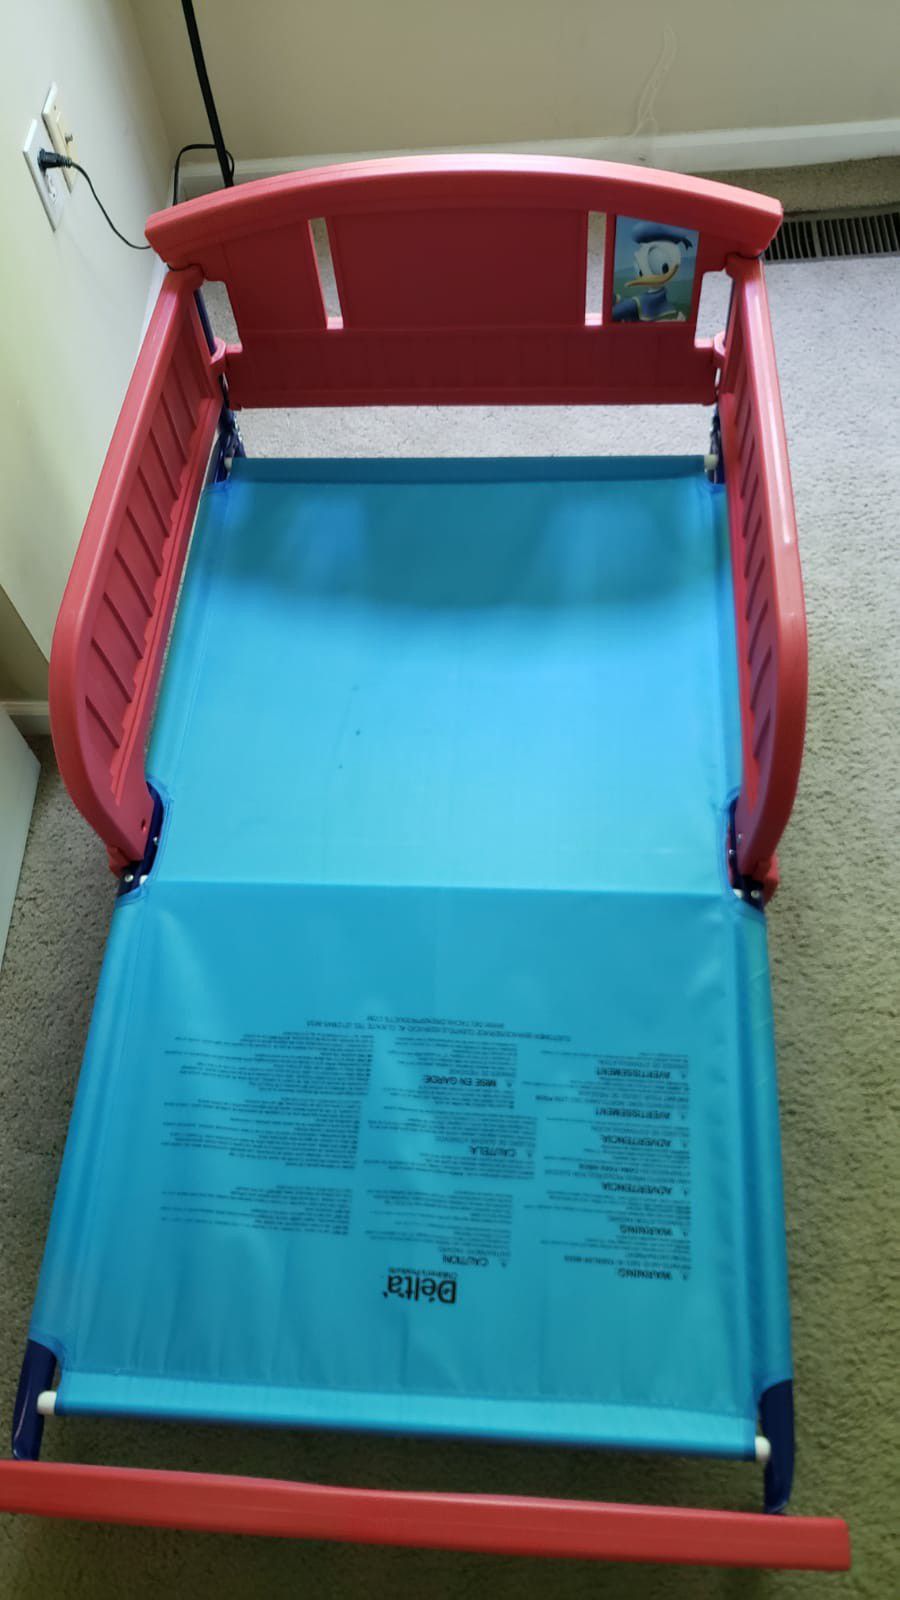 Kids Bed Frame with Mattress - $20.00